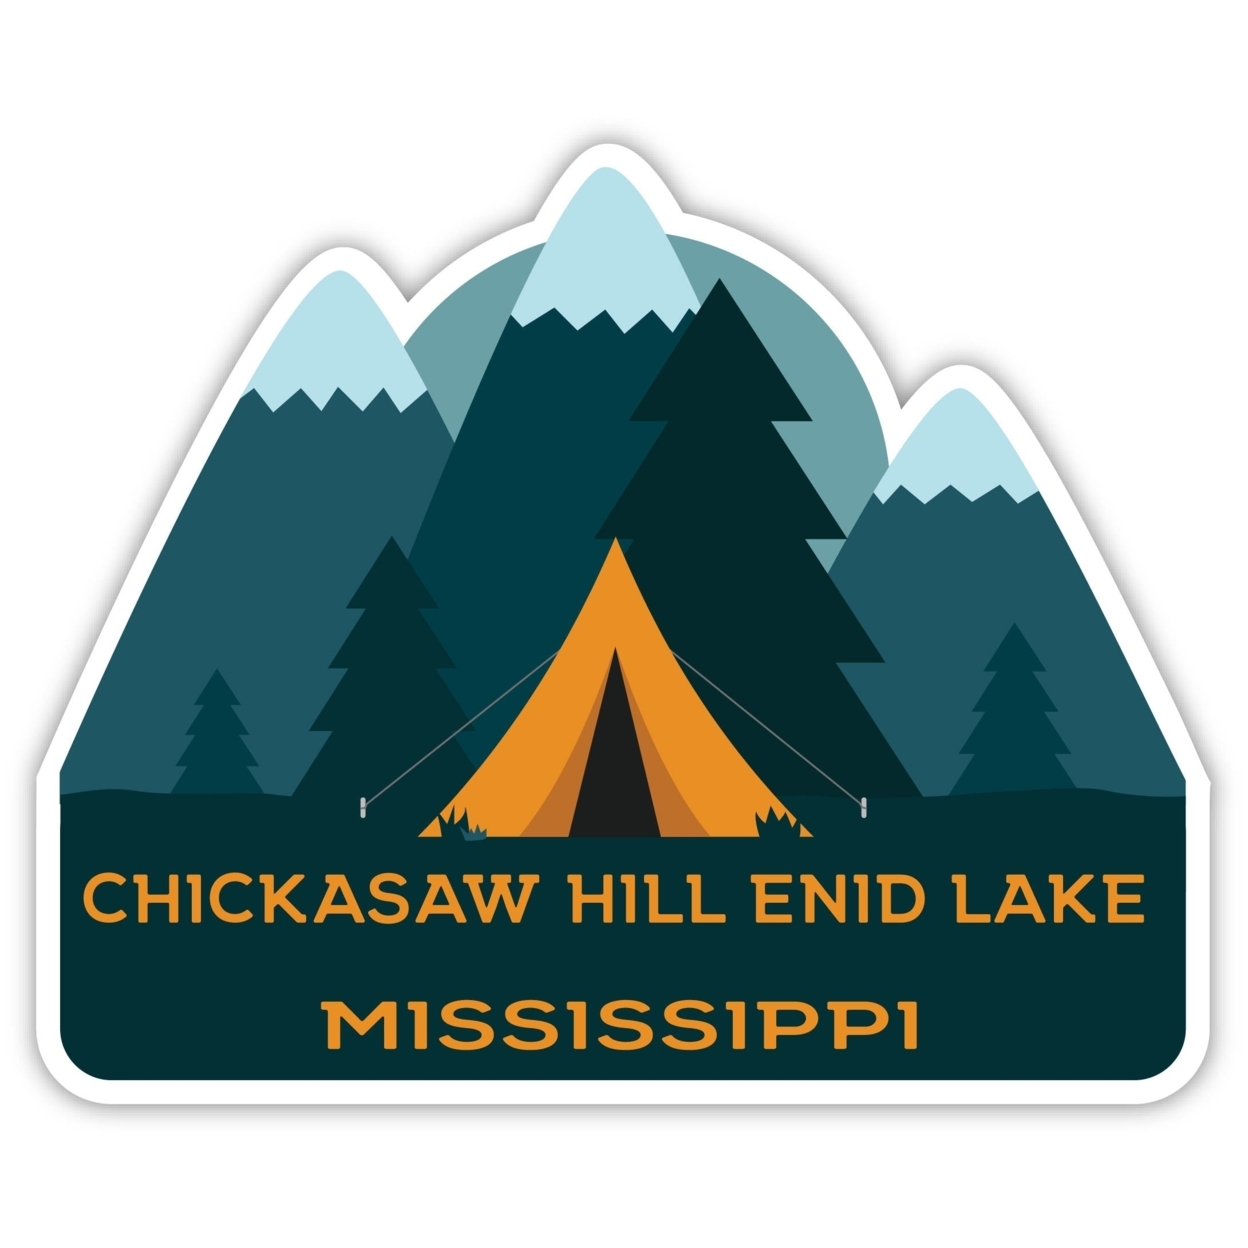 Chickasaw Hill Enid Lake Mississippi Souvenir Decorative Stickers (Choose Theme And Size) - 4-Pack, 2-Inch, Tent